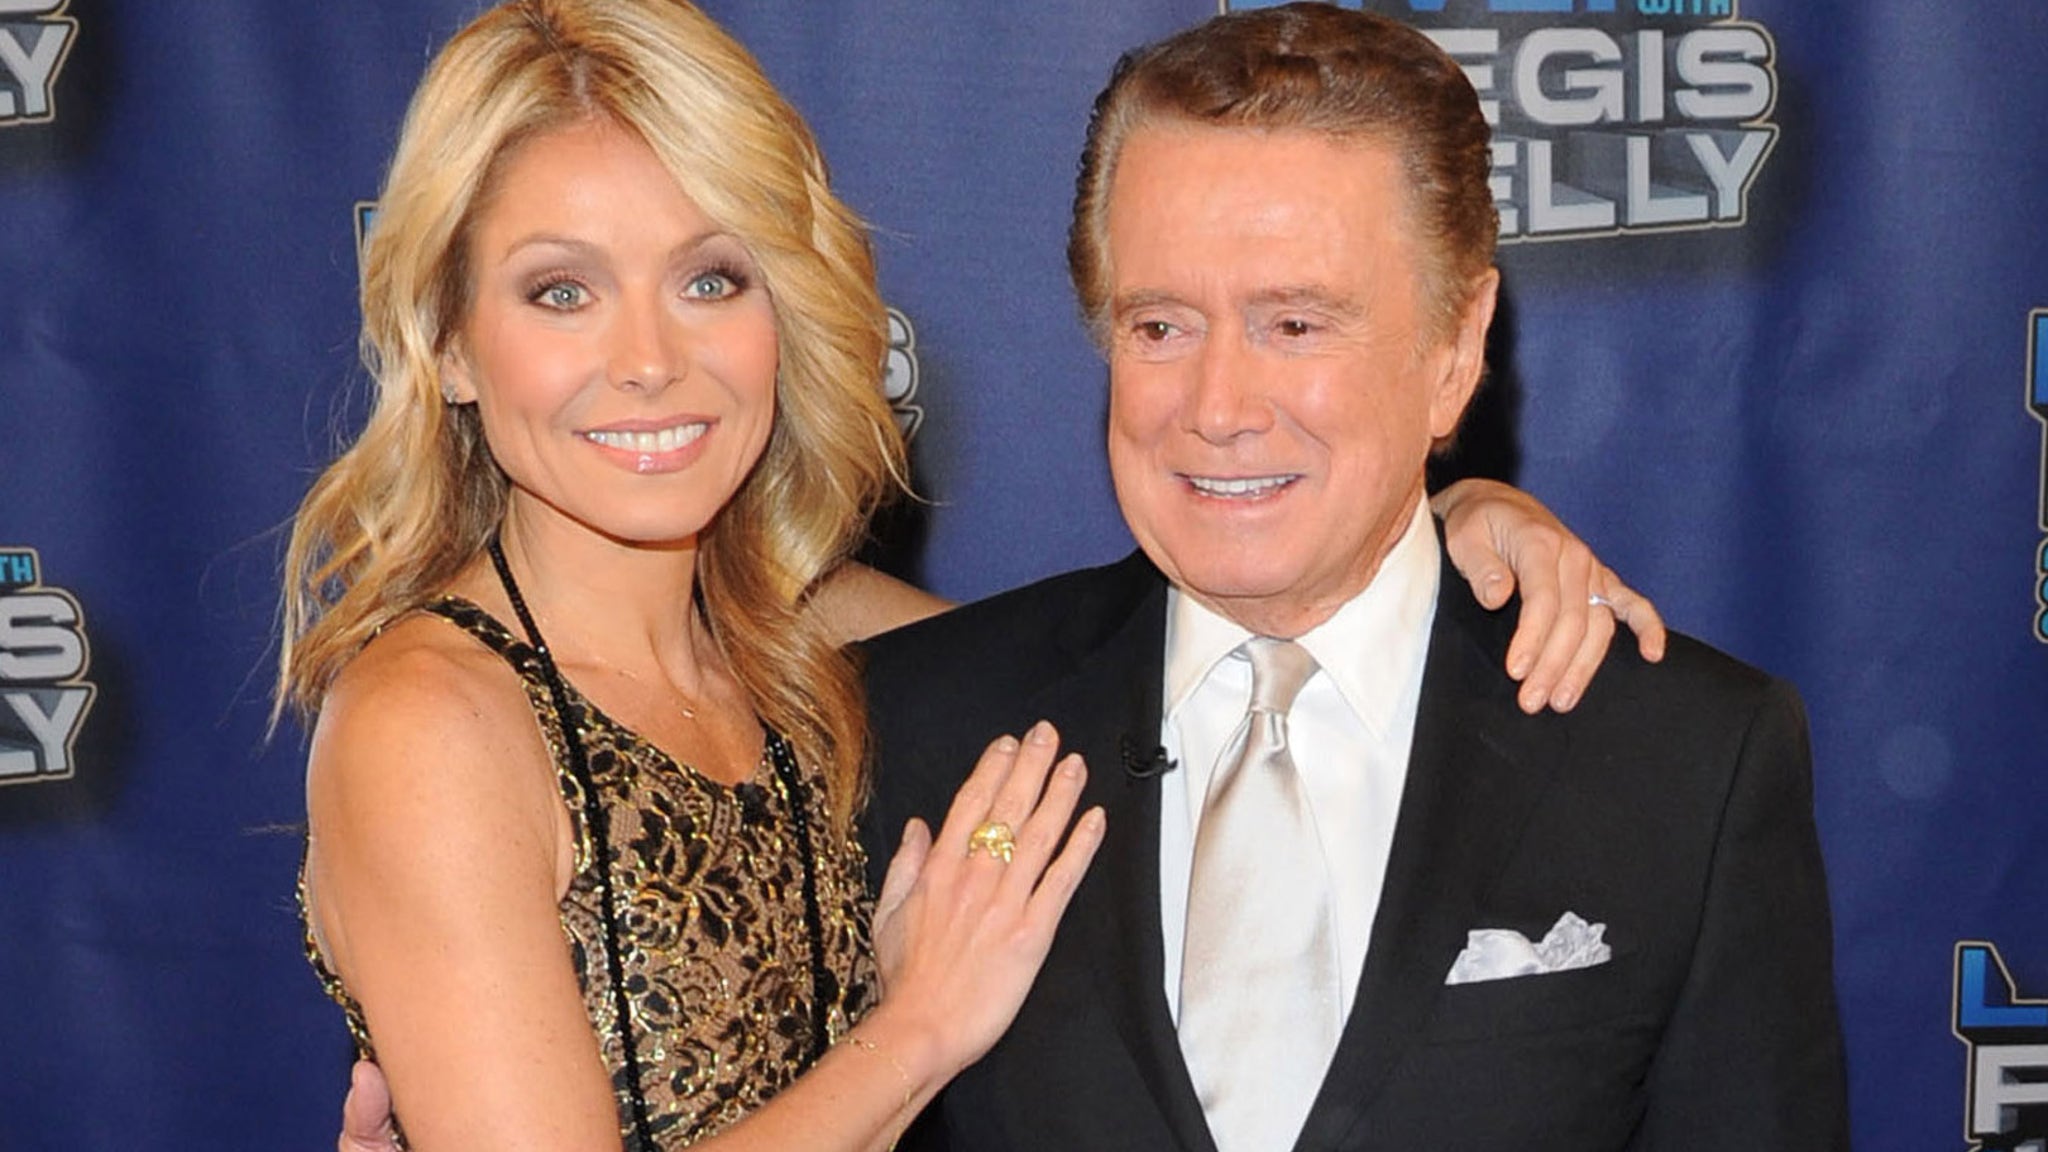 Kelly Ripa on Tensions with Regis Philbin: 'You Can't Make a Person Befriend You'